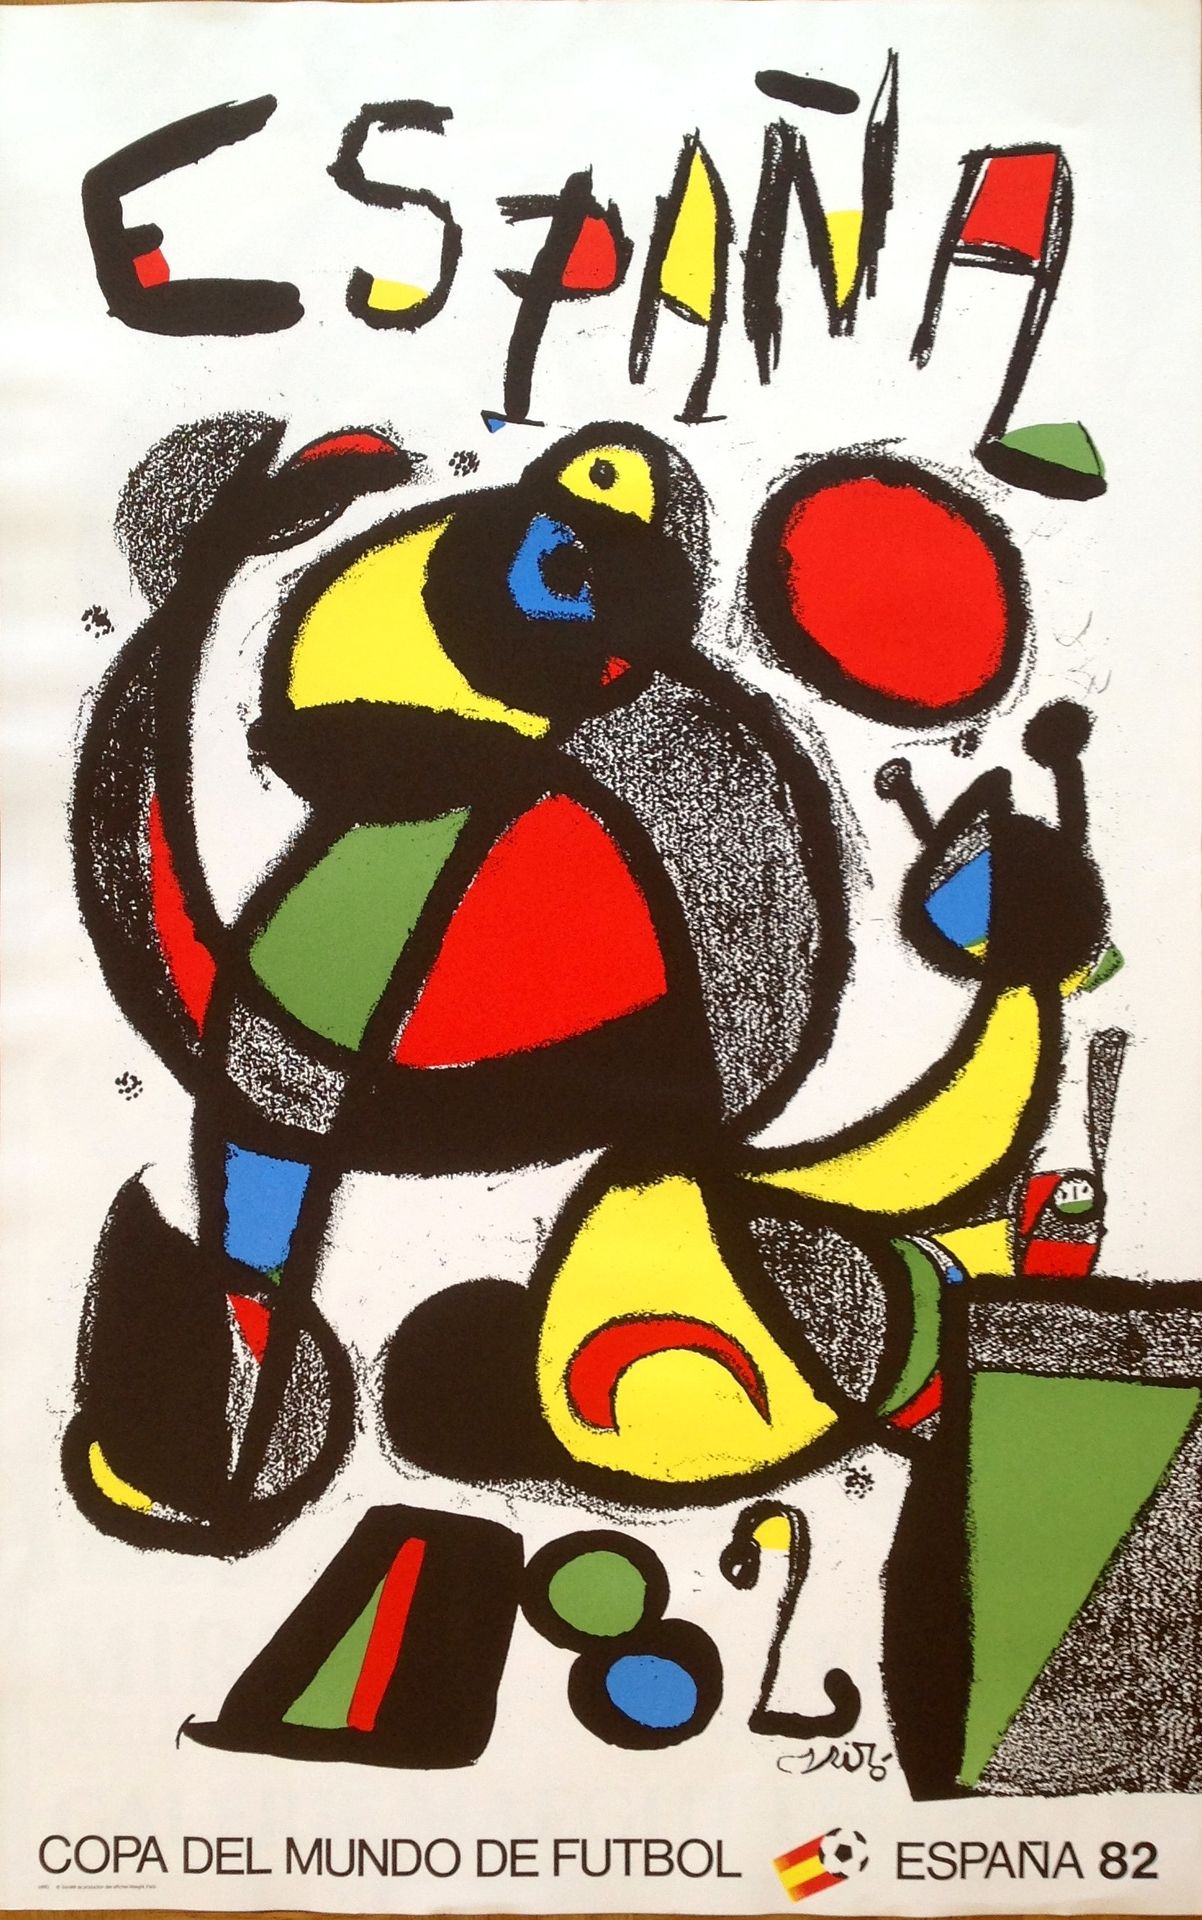 Joan Miro Joan MIRÓ (After)

Poster for the World Cup in Spain, 1982

Dimensions&hellip;